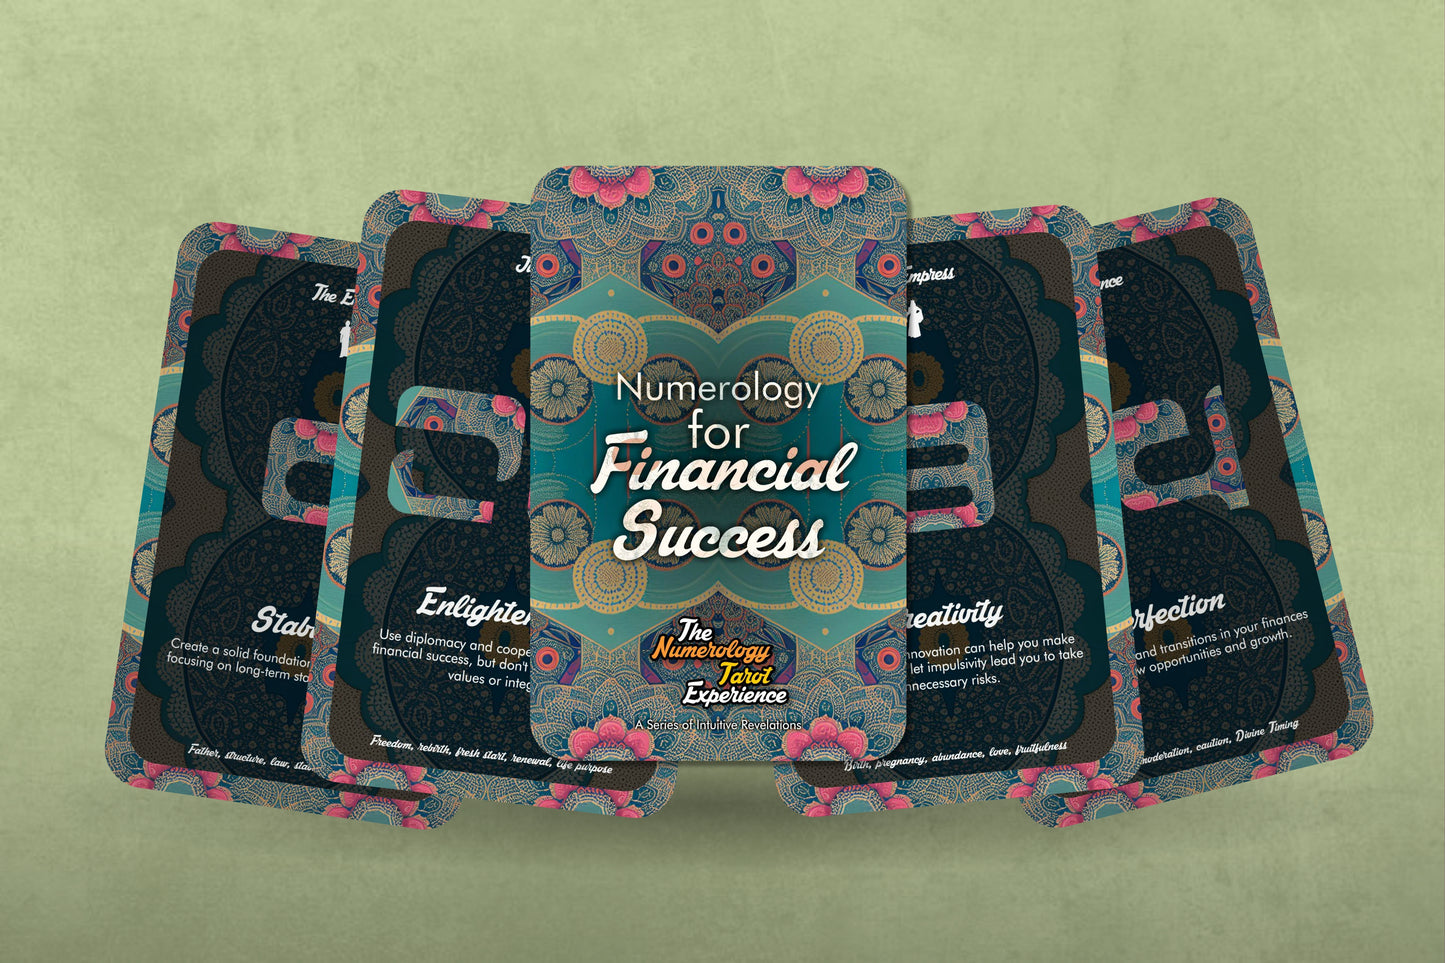 Numerology for Financial Success - The Numerology Tarot Experience